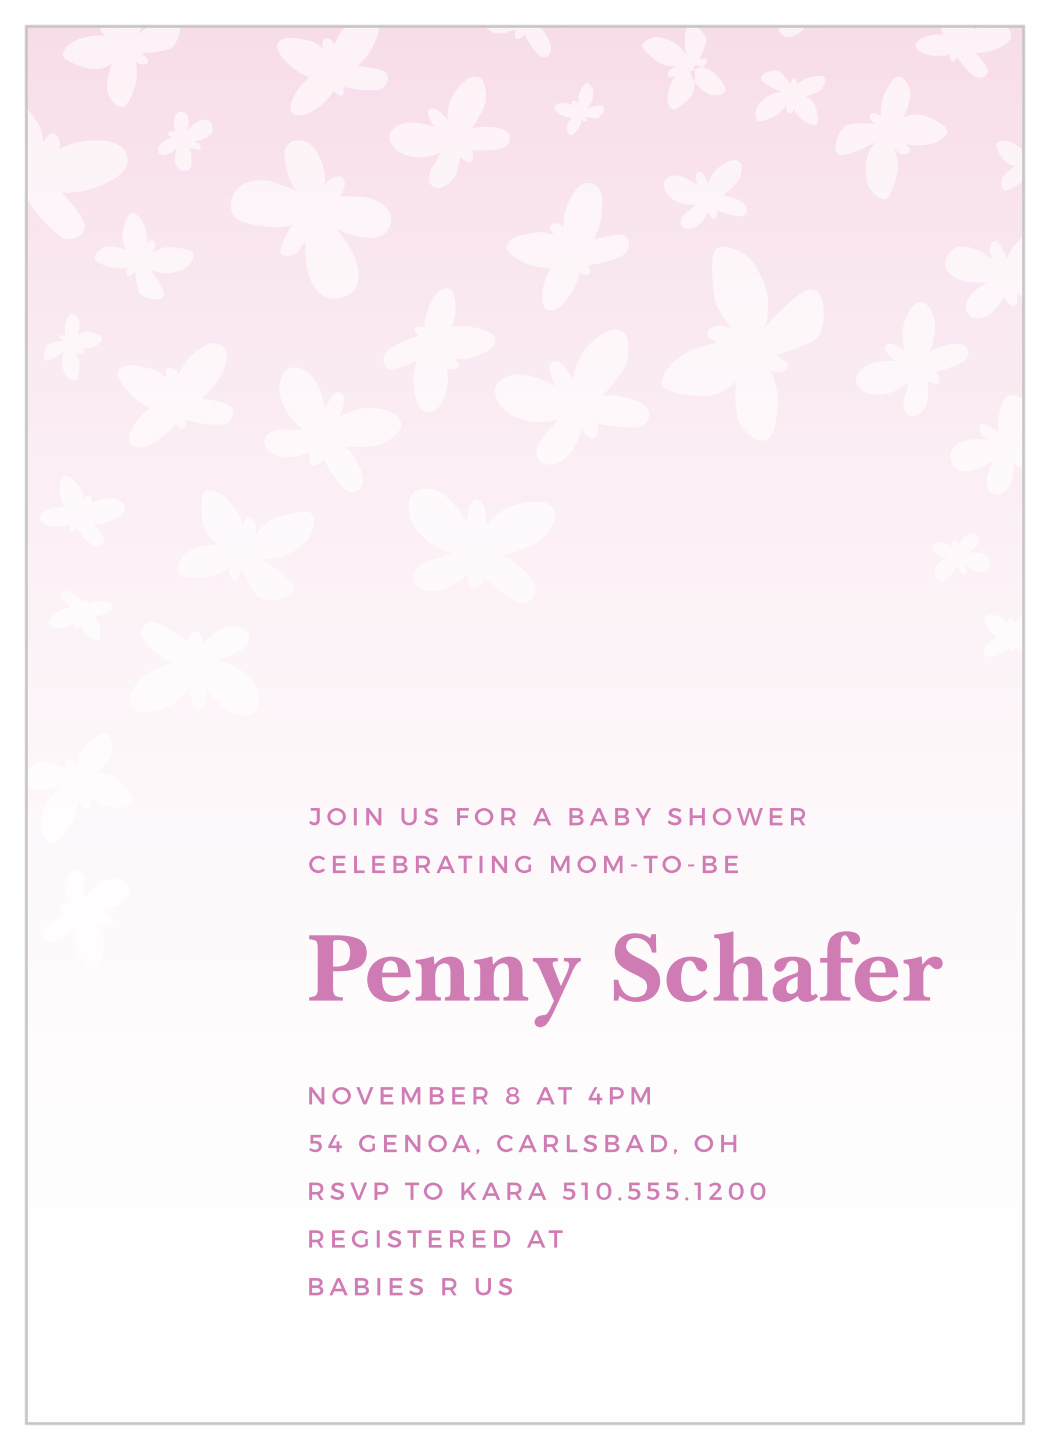 Butterfly Haven Baby Shower Invitations